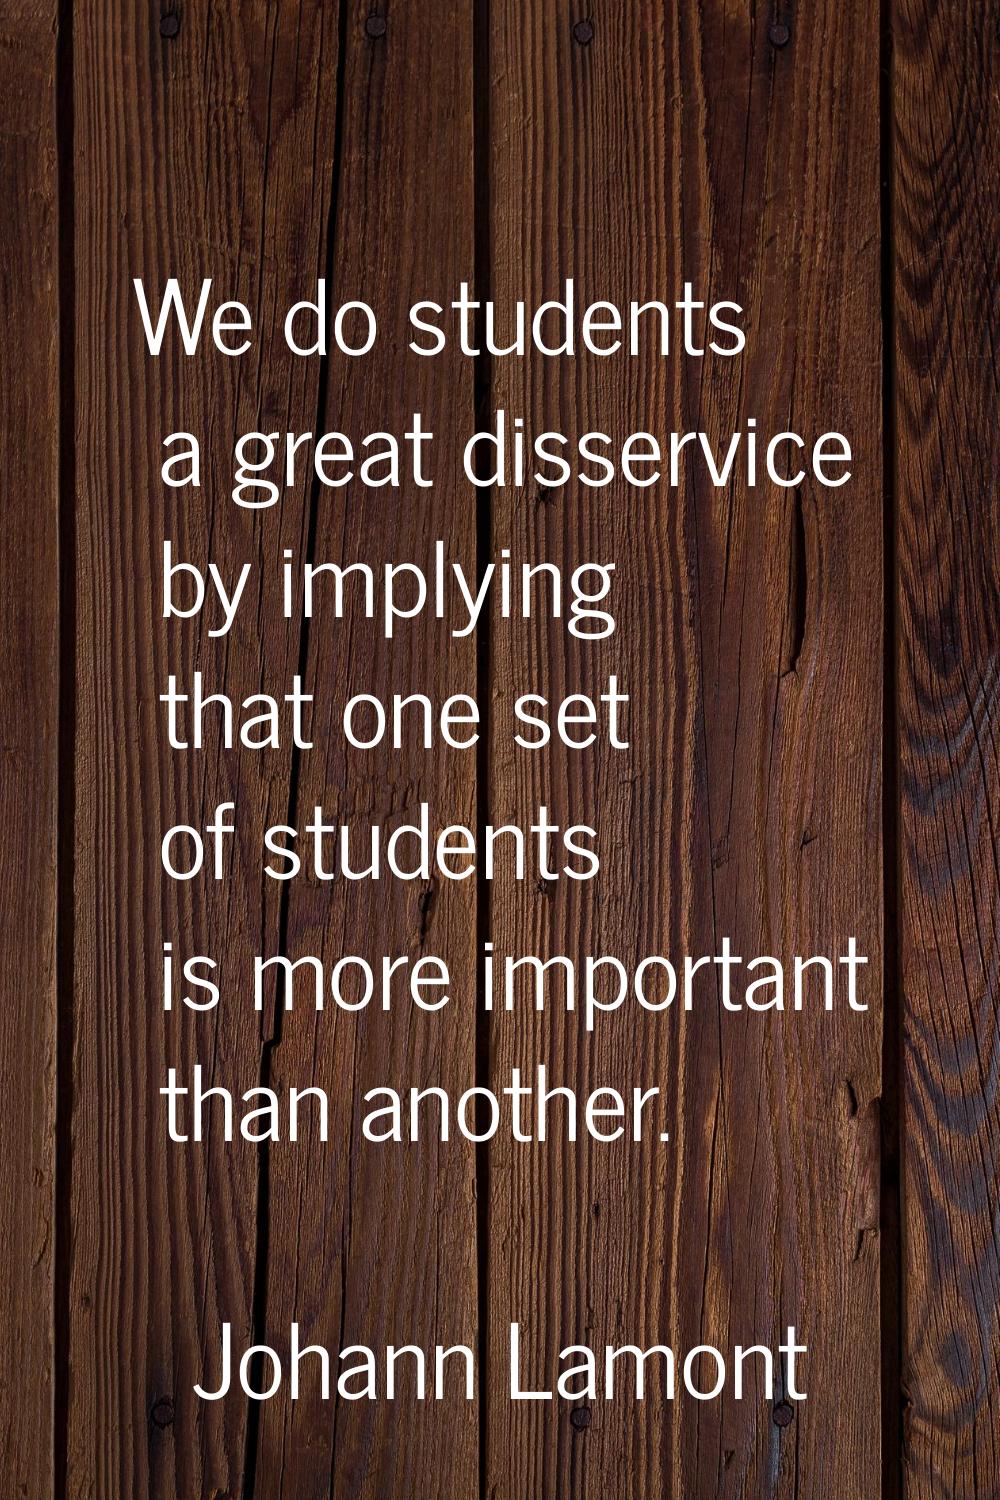 We do students a great disservice by implying that one set of students is more important than anoth